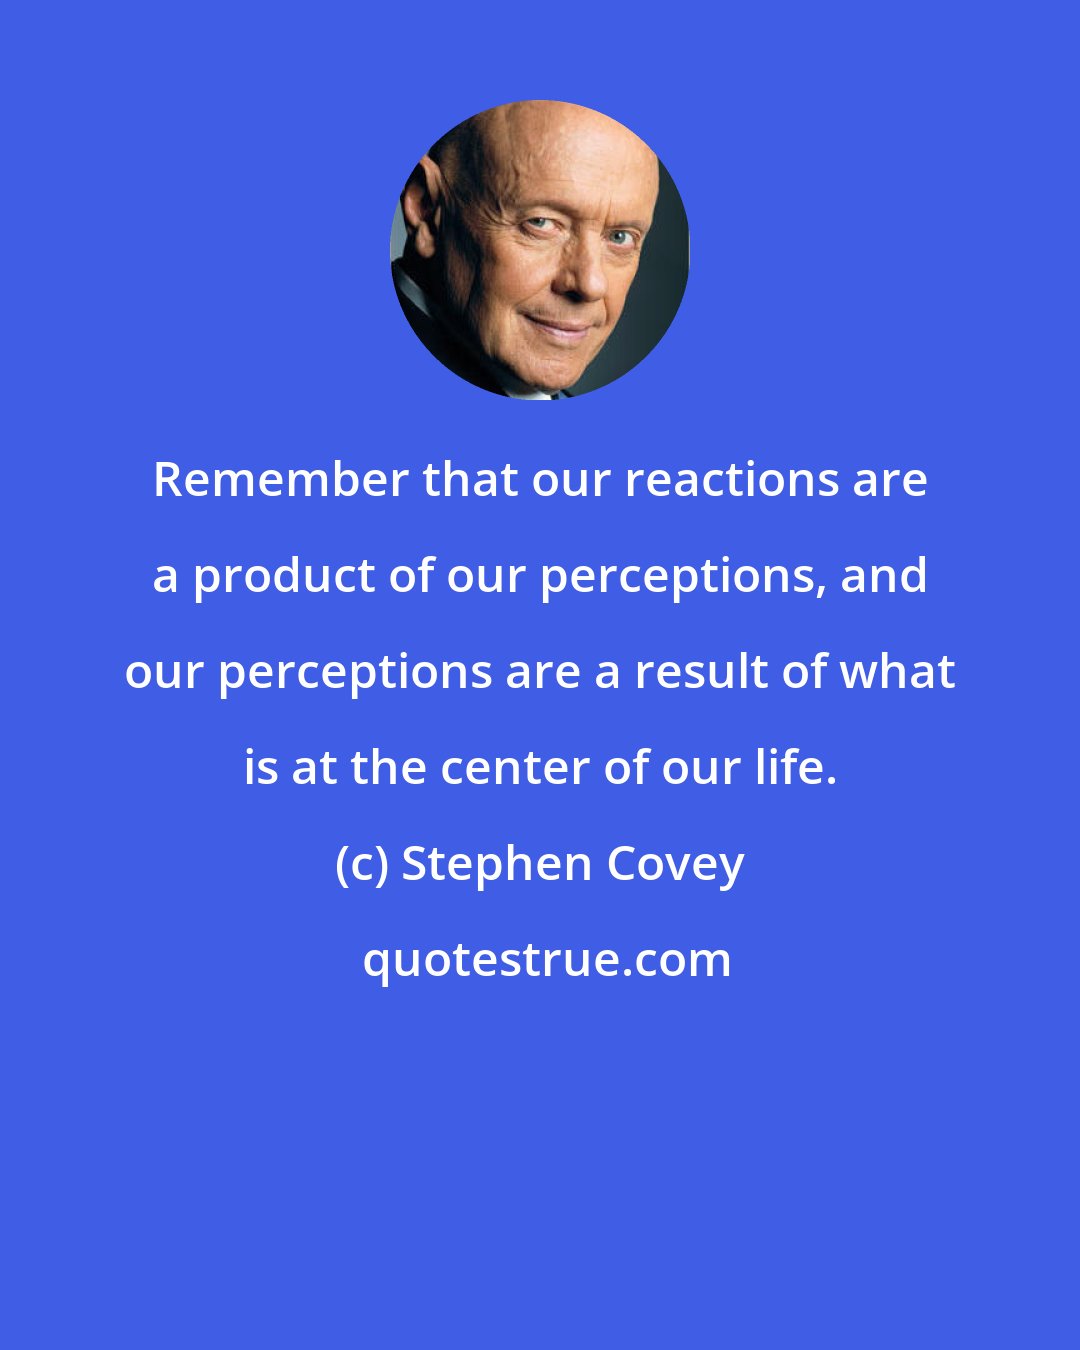 Stephen Covey: Remember that our reactions are a product of our perceptions, and our perceptions are a result of what is at the center of our life.